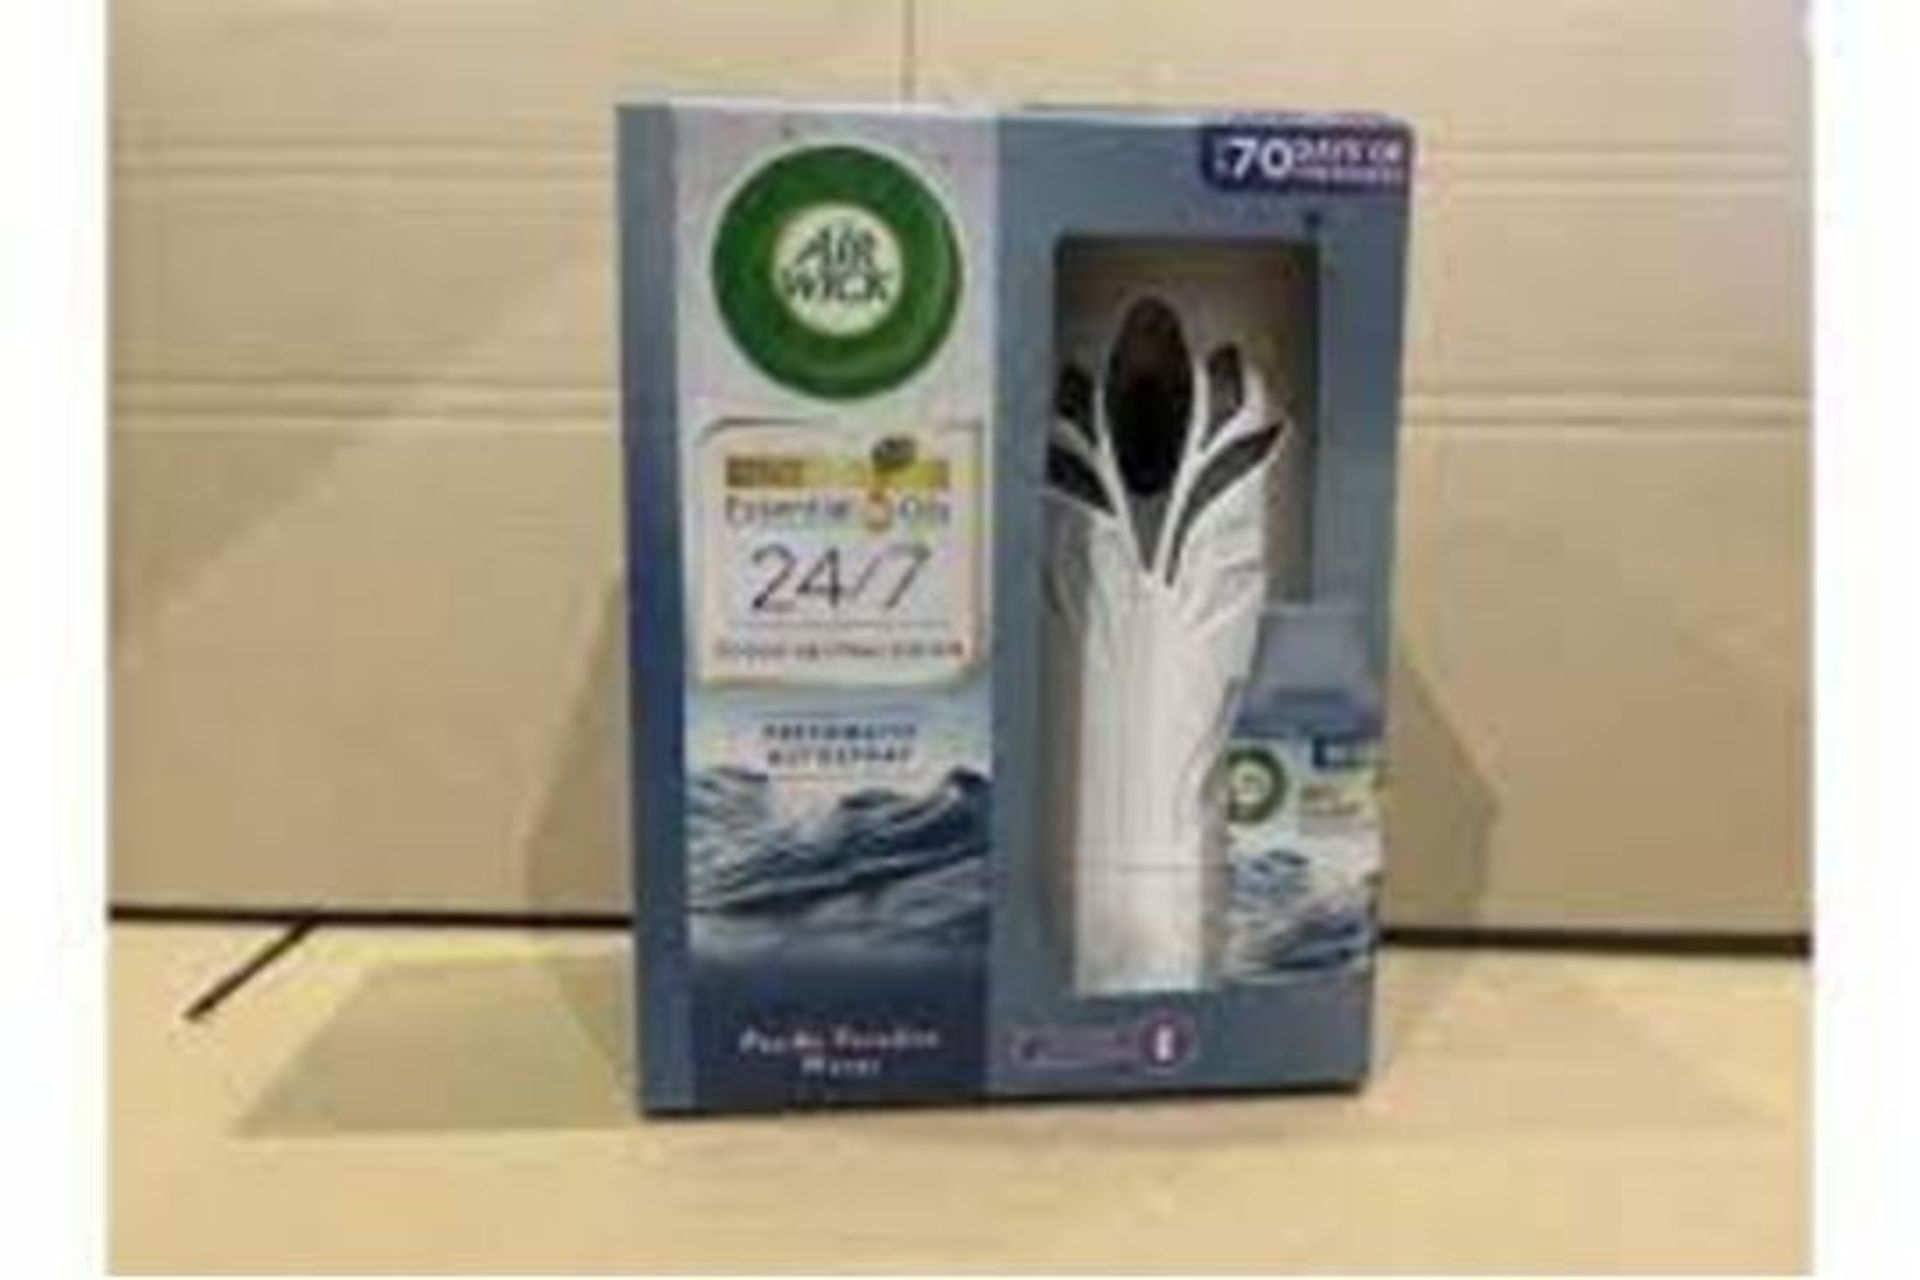 2 X BRAND NEW AIR WICK FRESHMATIC AUTOSPRAY 24/7 ESSENTIAL OILS ODOUR NEUTRALISATION DEVICES WITH